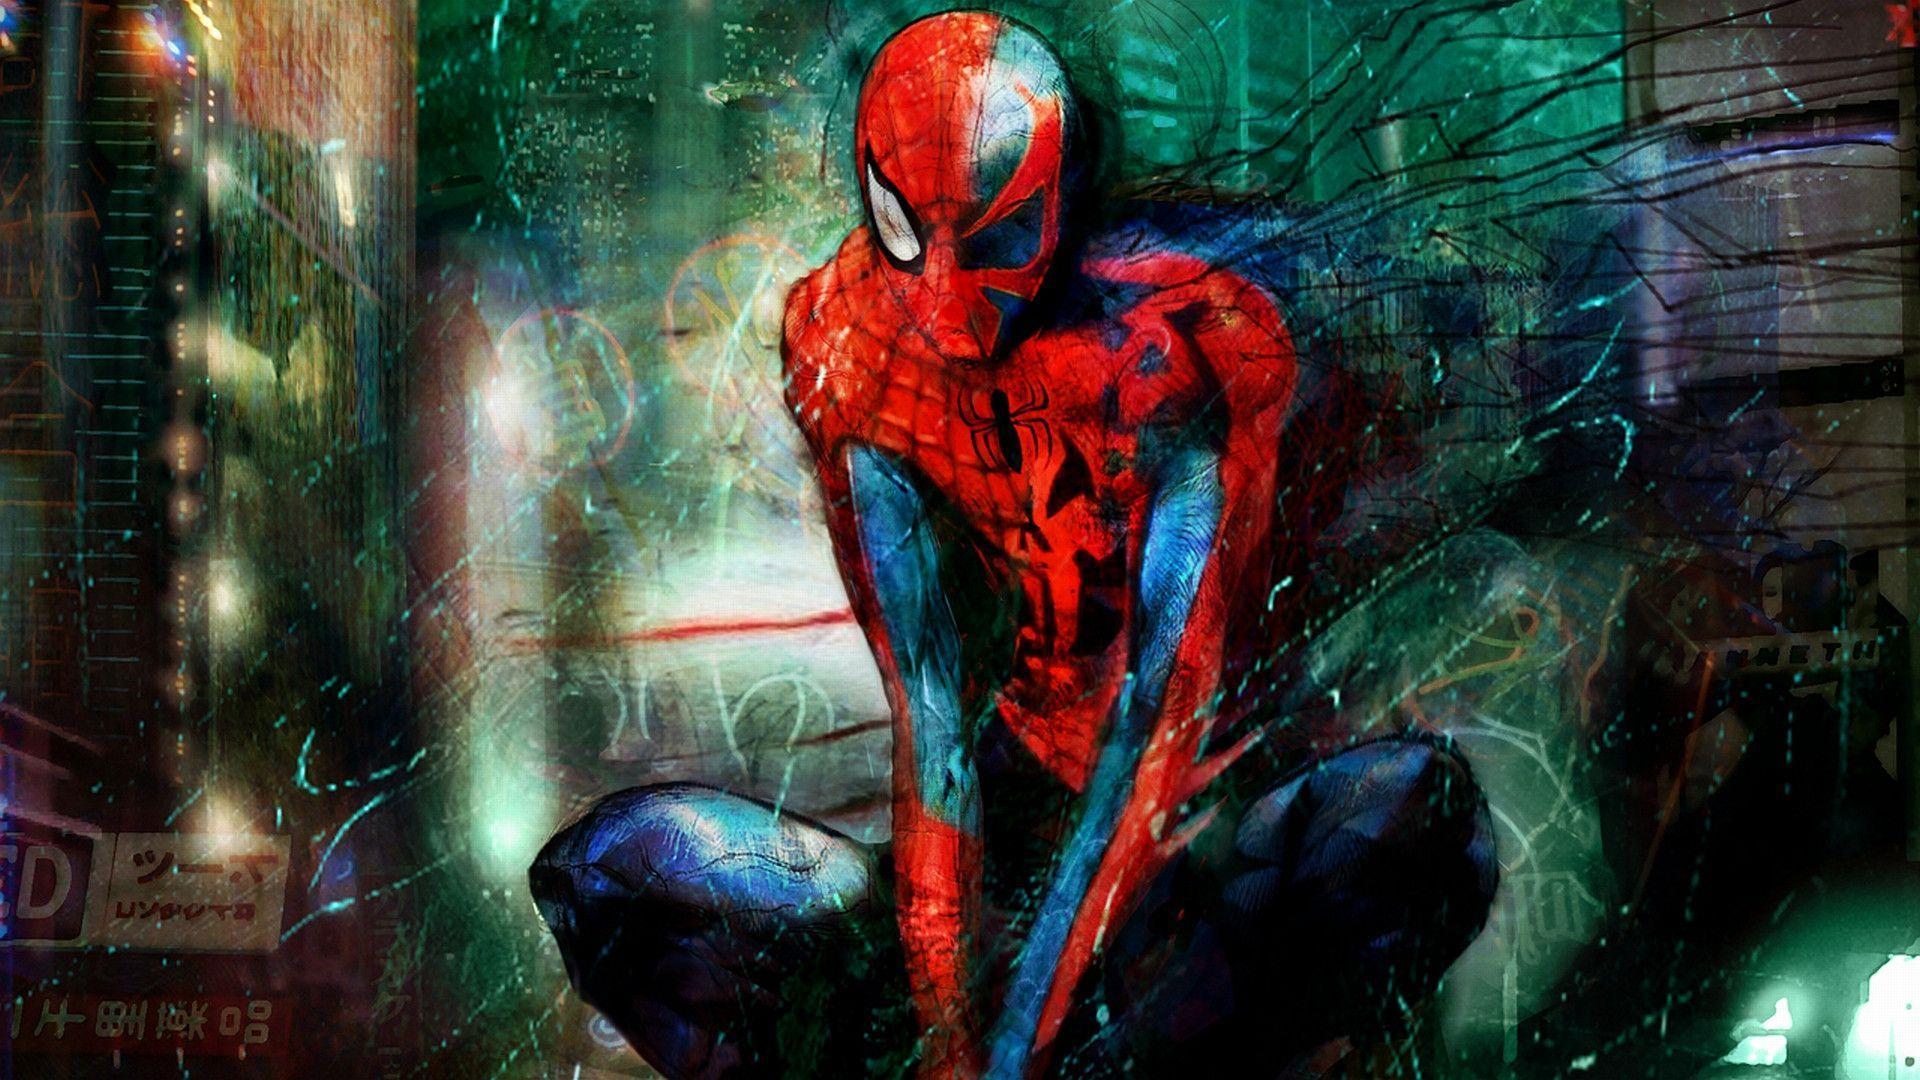 Spider-Man 2099 Wallpapers - Wallpaper Cave